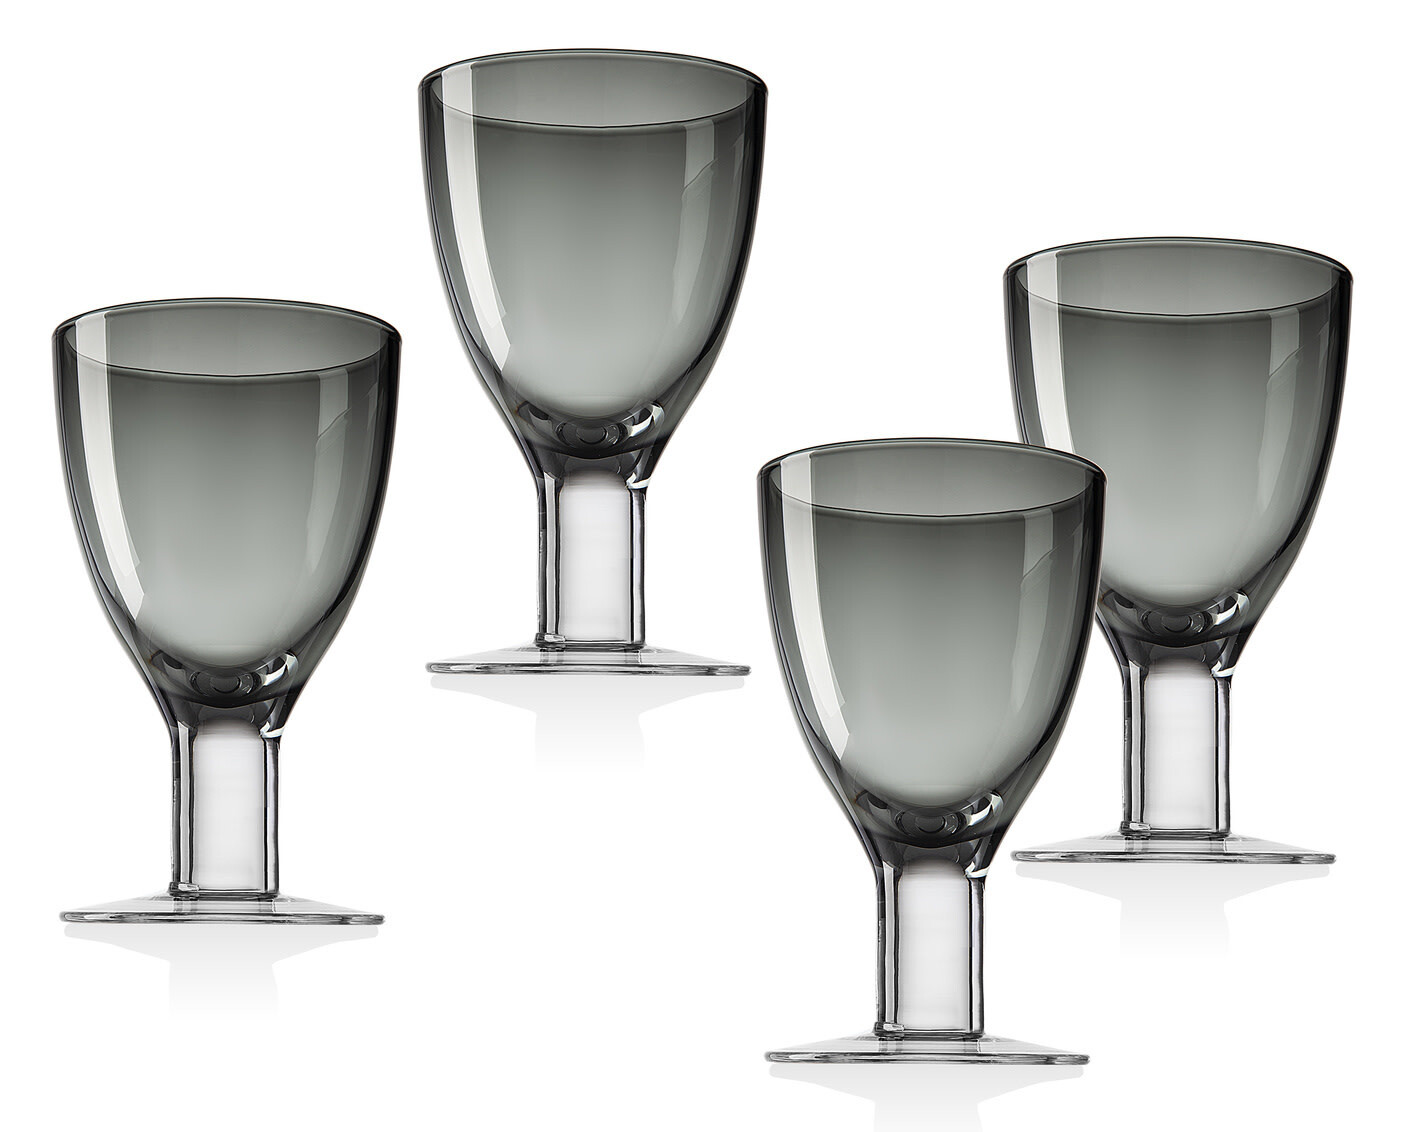 Galley Smoke Goblets S/4